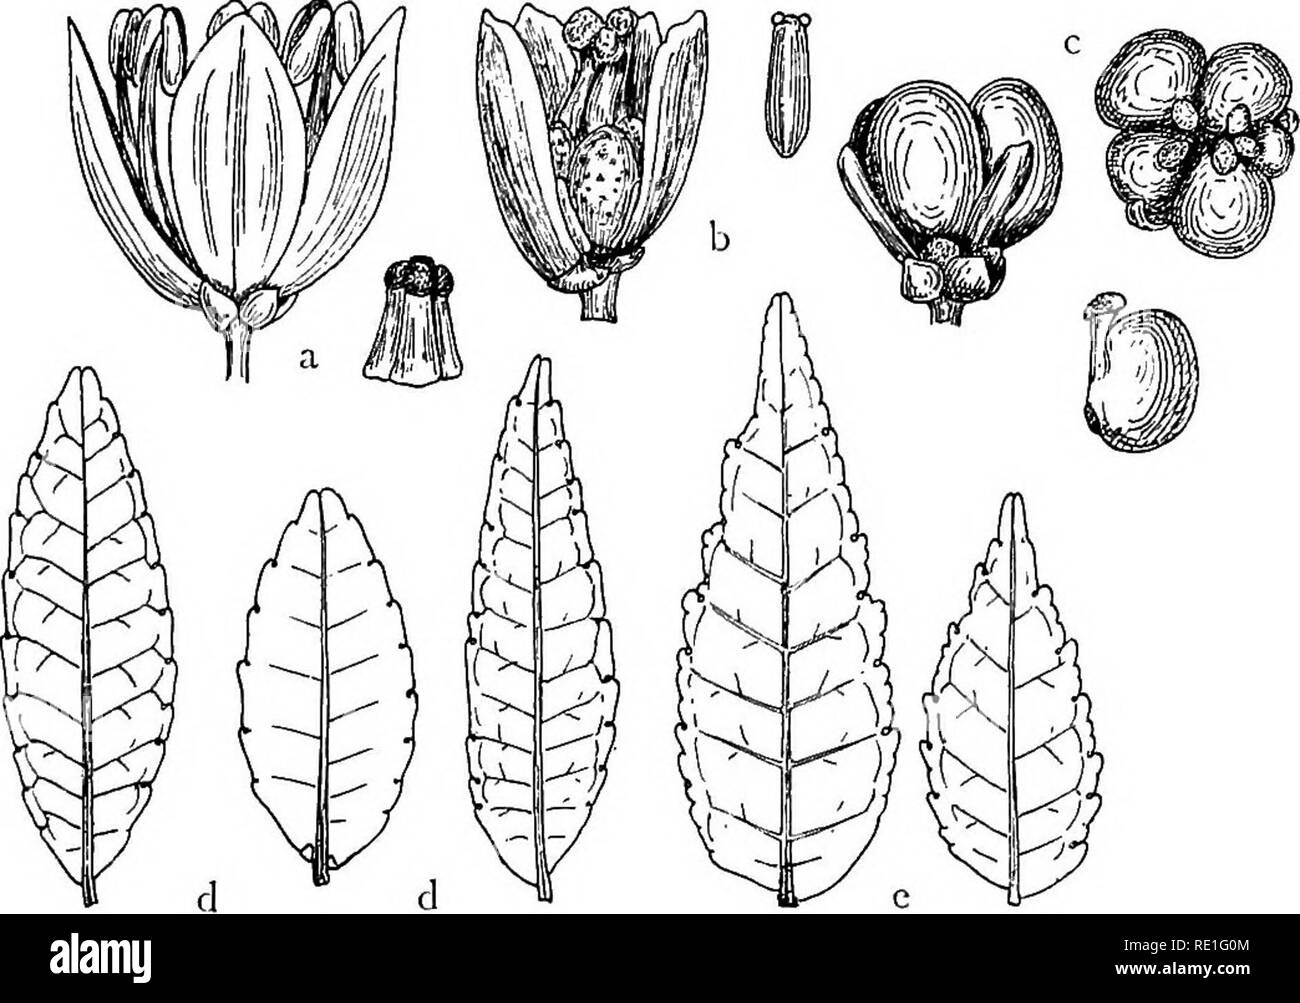 . The phanerogams of the Juan Fernandez Islands. Botany. THE PHANEROGAMS OF THE JUAN FERNANDEZ ISLANDS '43 Rutaceae. Fagara L. 70. F. mayu (Bert., Hook, et Arn.) Engler. — Johow, Estud. 105. — Fig. 14 a—d. Masatierra: The largest forest tree and one of the commonest, ranging from Pto Frances to Q. Juanango and Co Chumacera and from about 200 m (or less) to more than 600 m (unr. fr. Dec. 1916, no. 194'; buds 11U 17, no. 617; male fl. 18/8 17, no. 617 b, leg. K. Backstrom).. Fig. 14. a—d Fagara mayu: a &lt;f flower with gynaeceum, b flower (one petal removed) with staminode, c 9 in fruit, latera Stock Photo